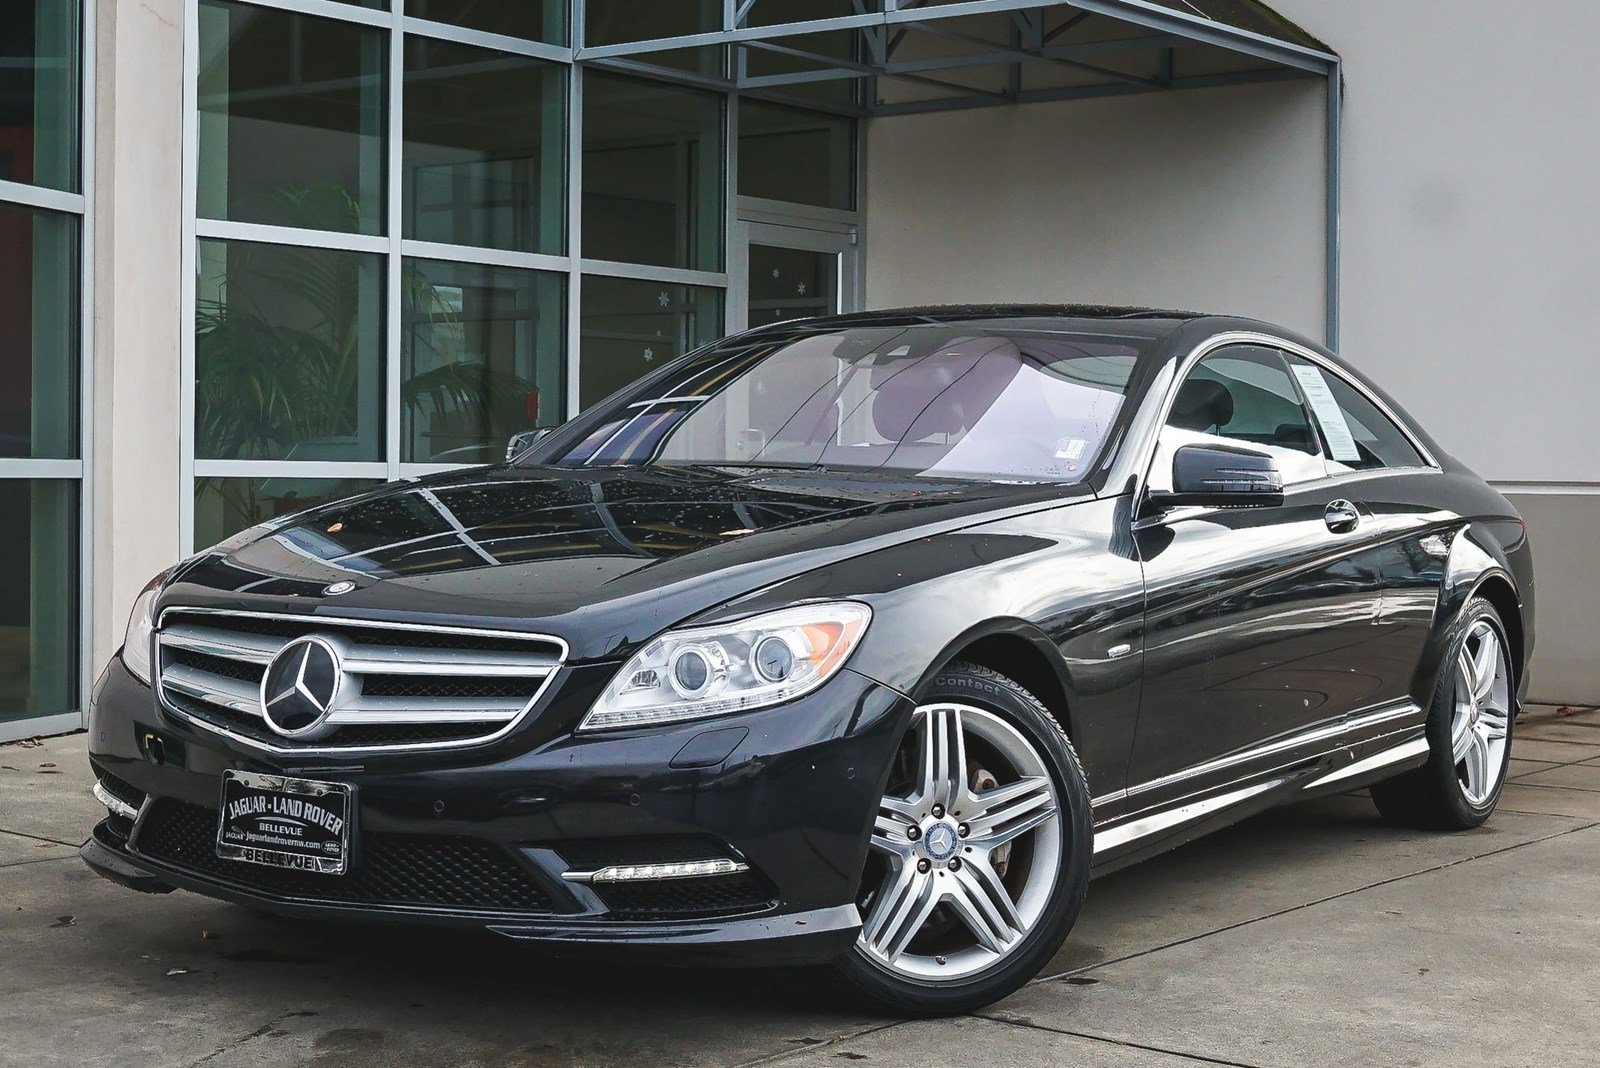 Pre-Owned 2013 Mercedes-Benz CL-Class CL 550 2dr Car in Lynnwood #8590